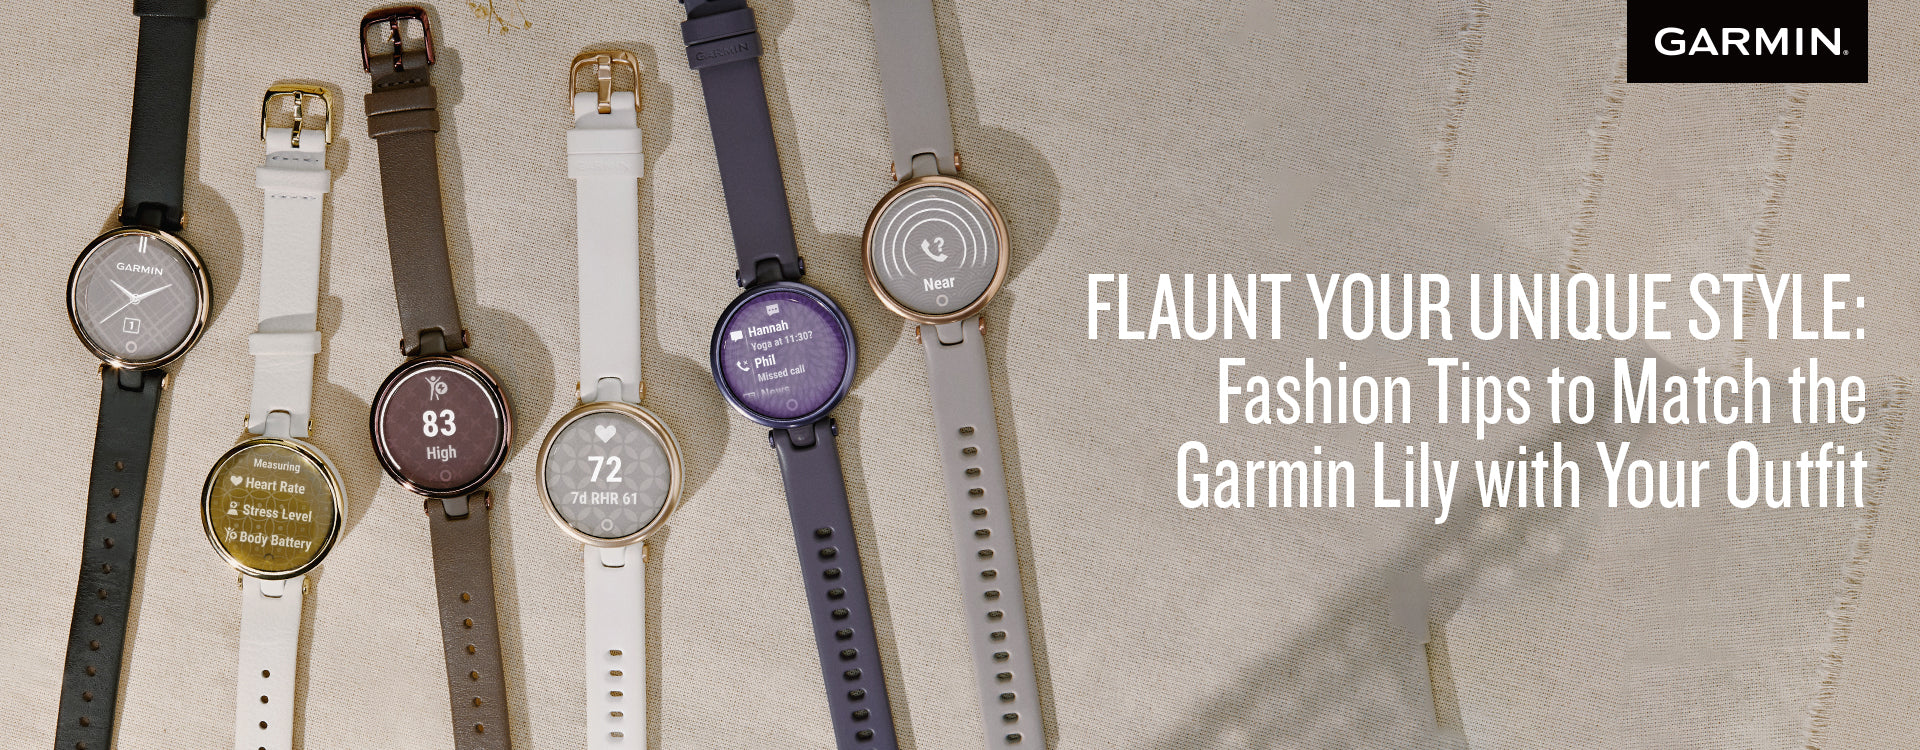 Flaunt Your Unique Style: Fashion Tips to Match the Garmin Lily with Your Outfit